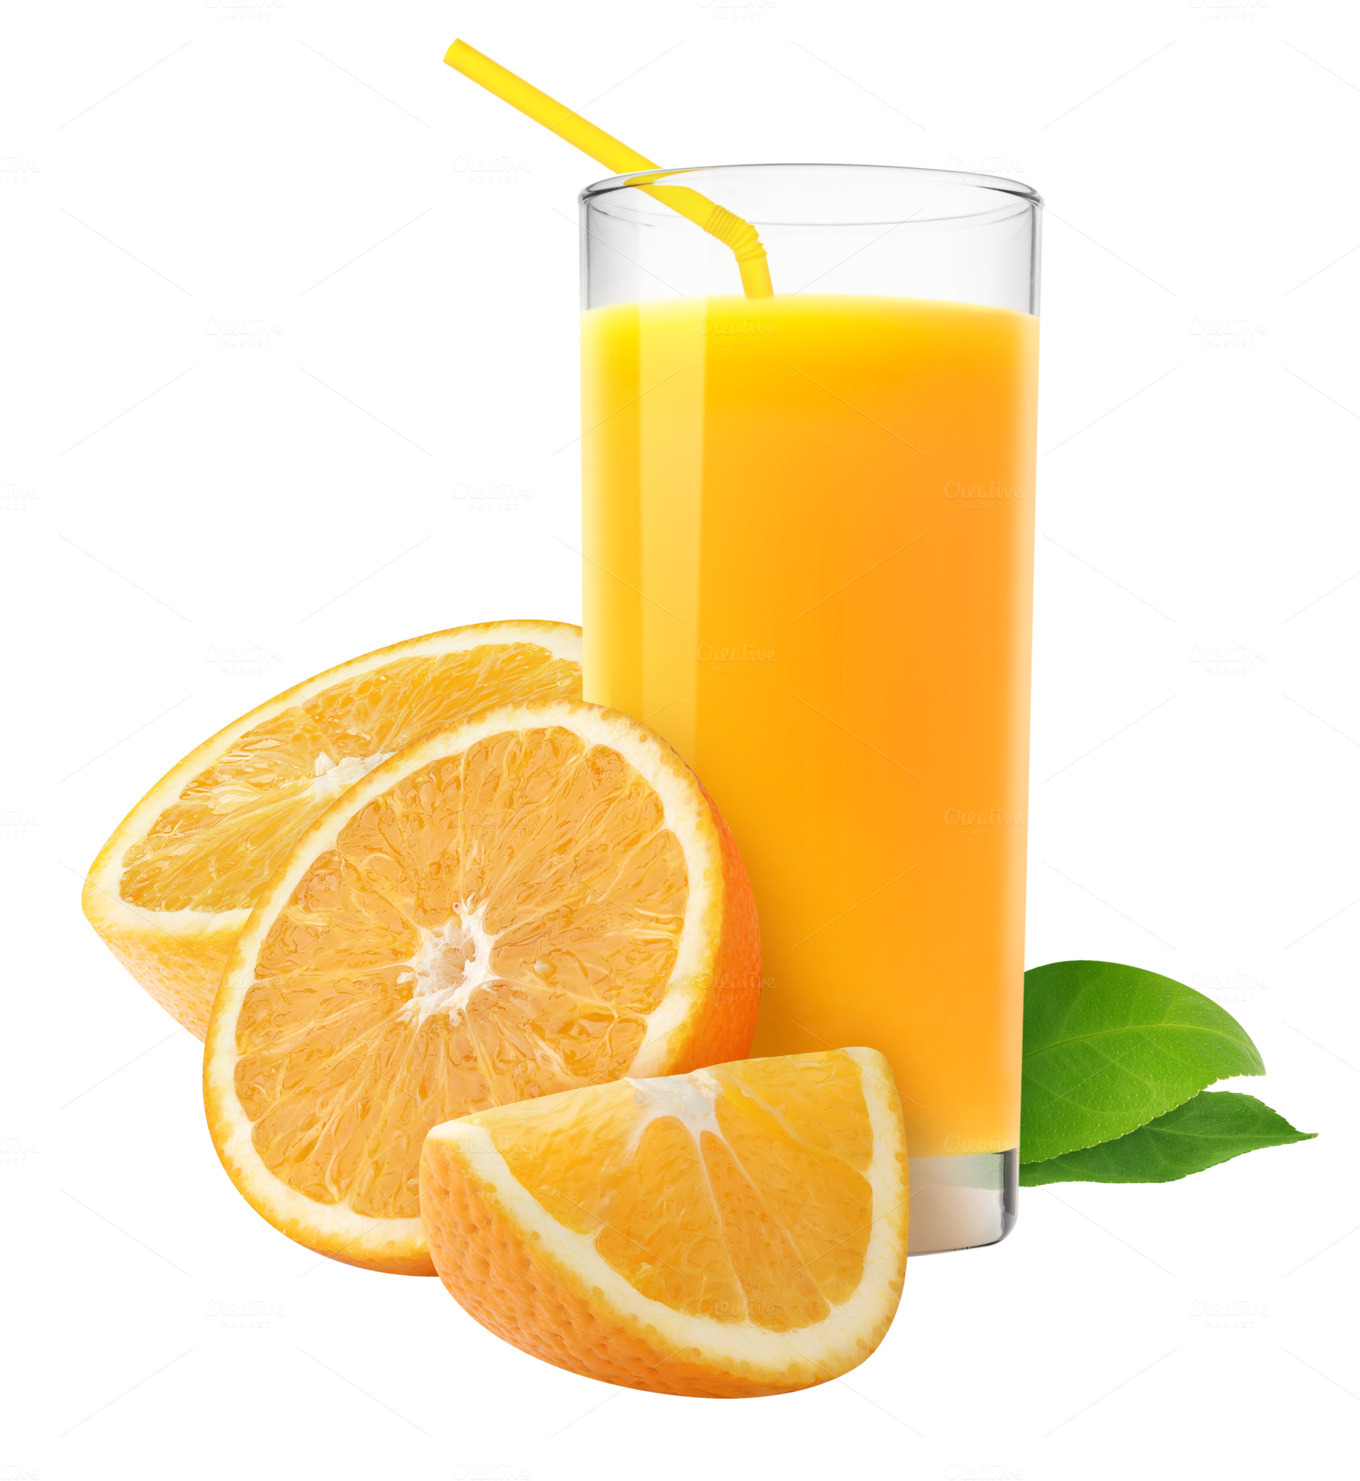 Isolated Glass Of Orange Juice Food And Drink Photos On Creative Market